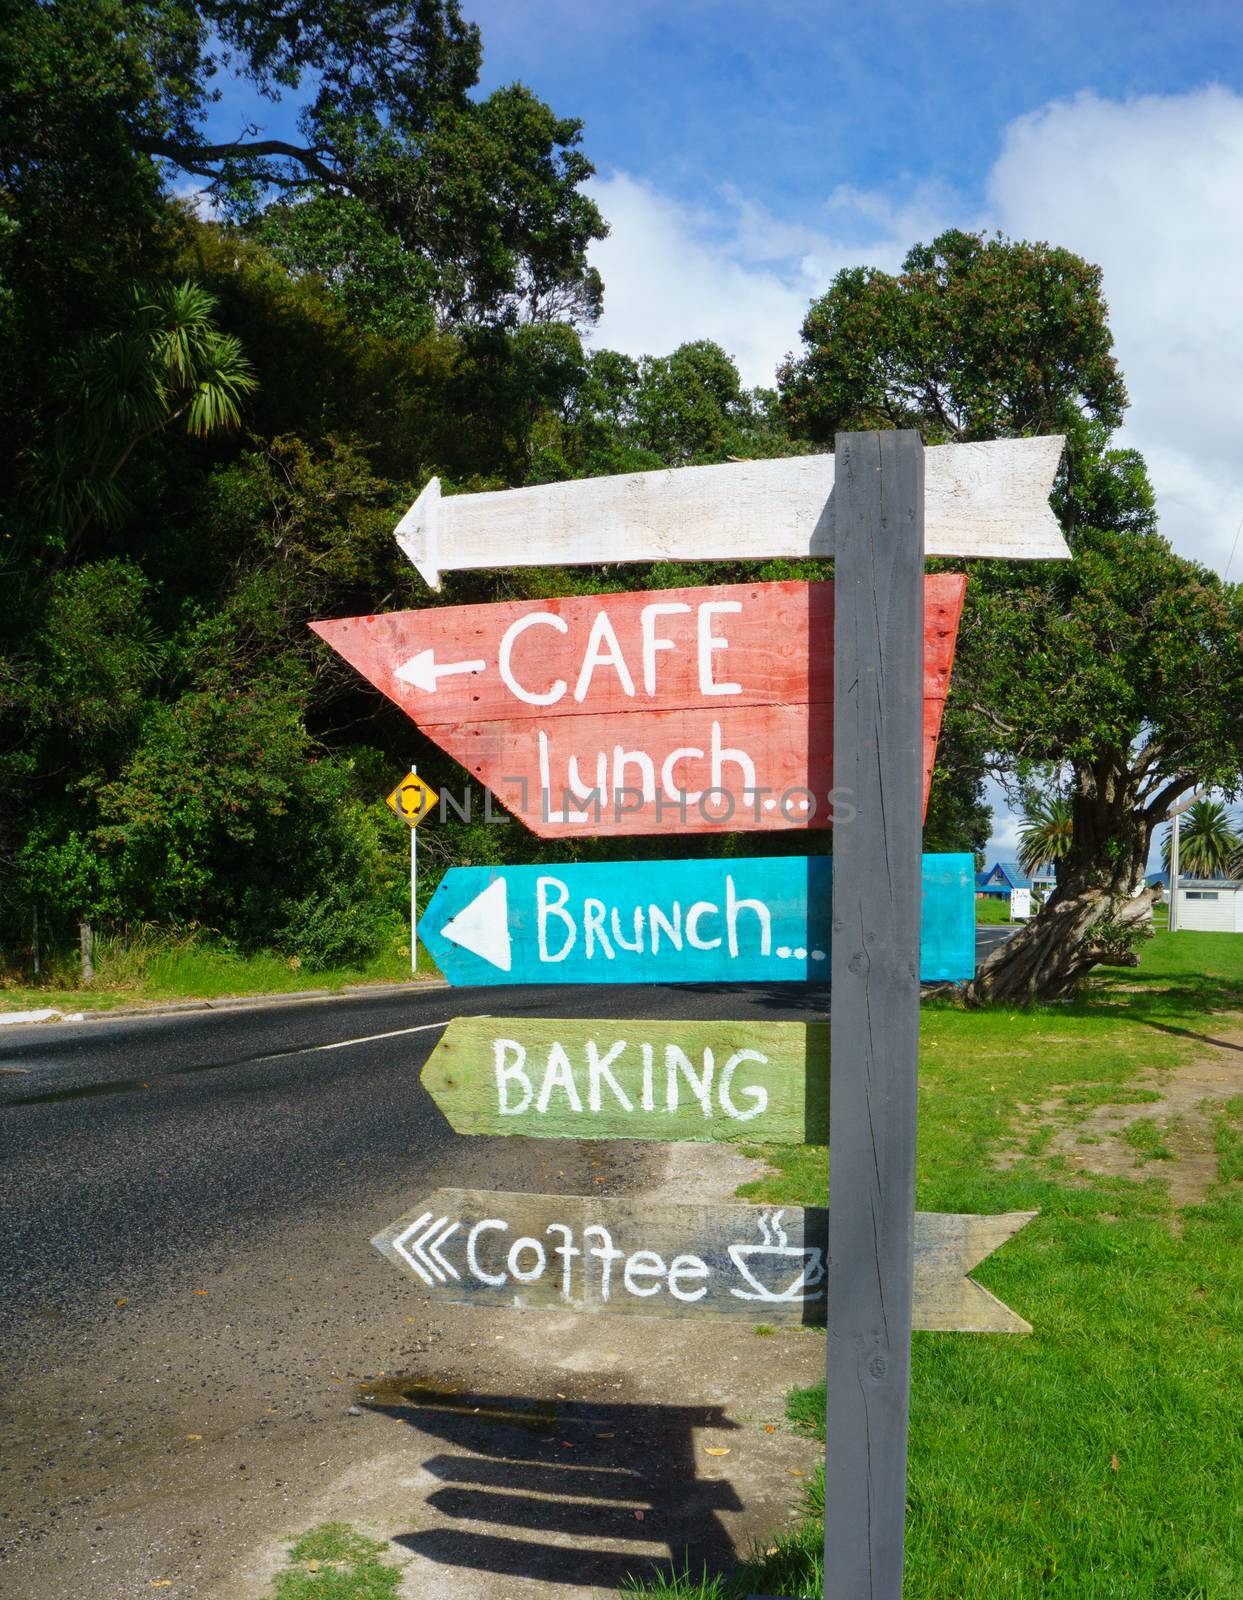 Rustic sign point way to cafe advertising lunch, brunch and coffee.  on side of street.